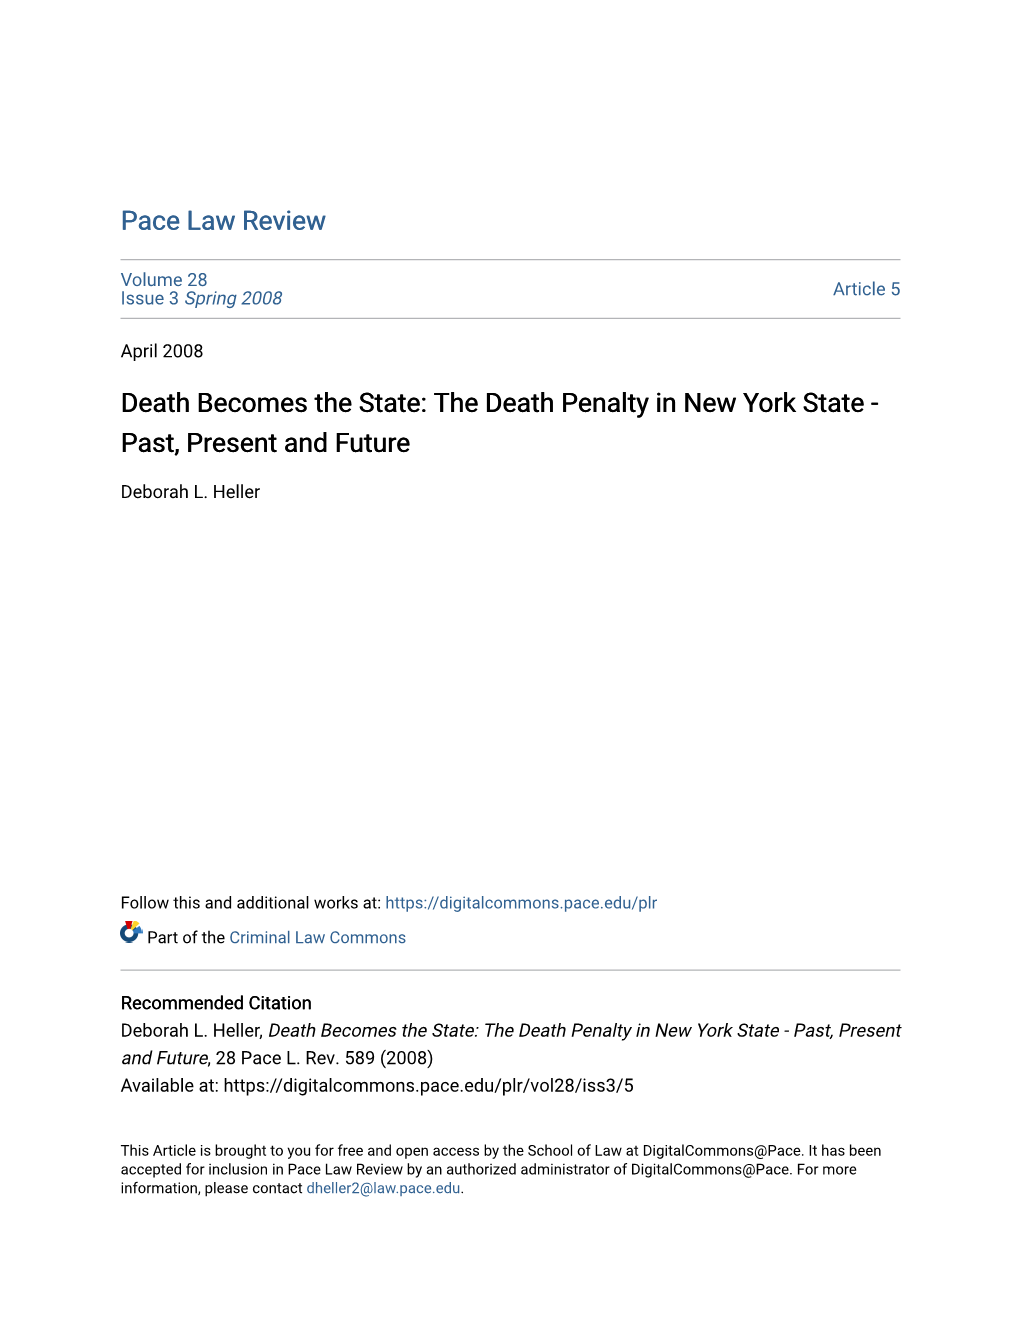 The Death Penalty in New York State - Past, Present and Future